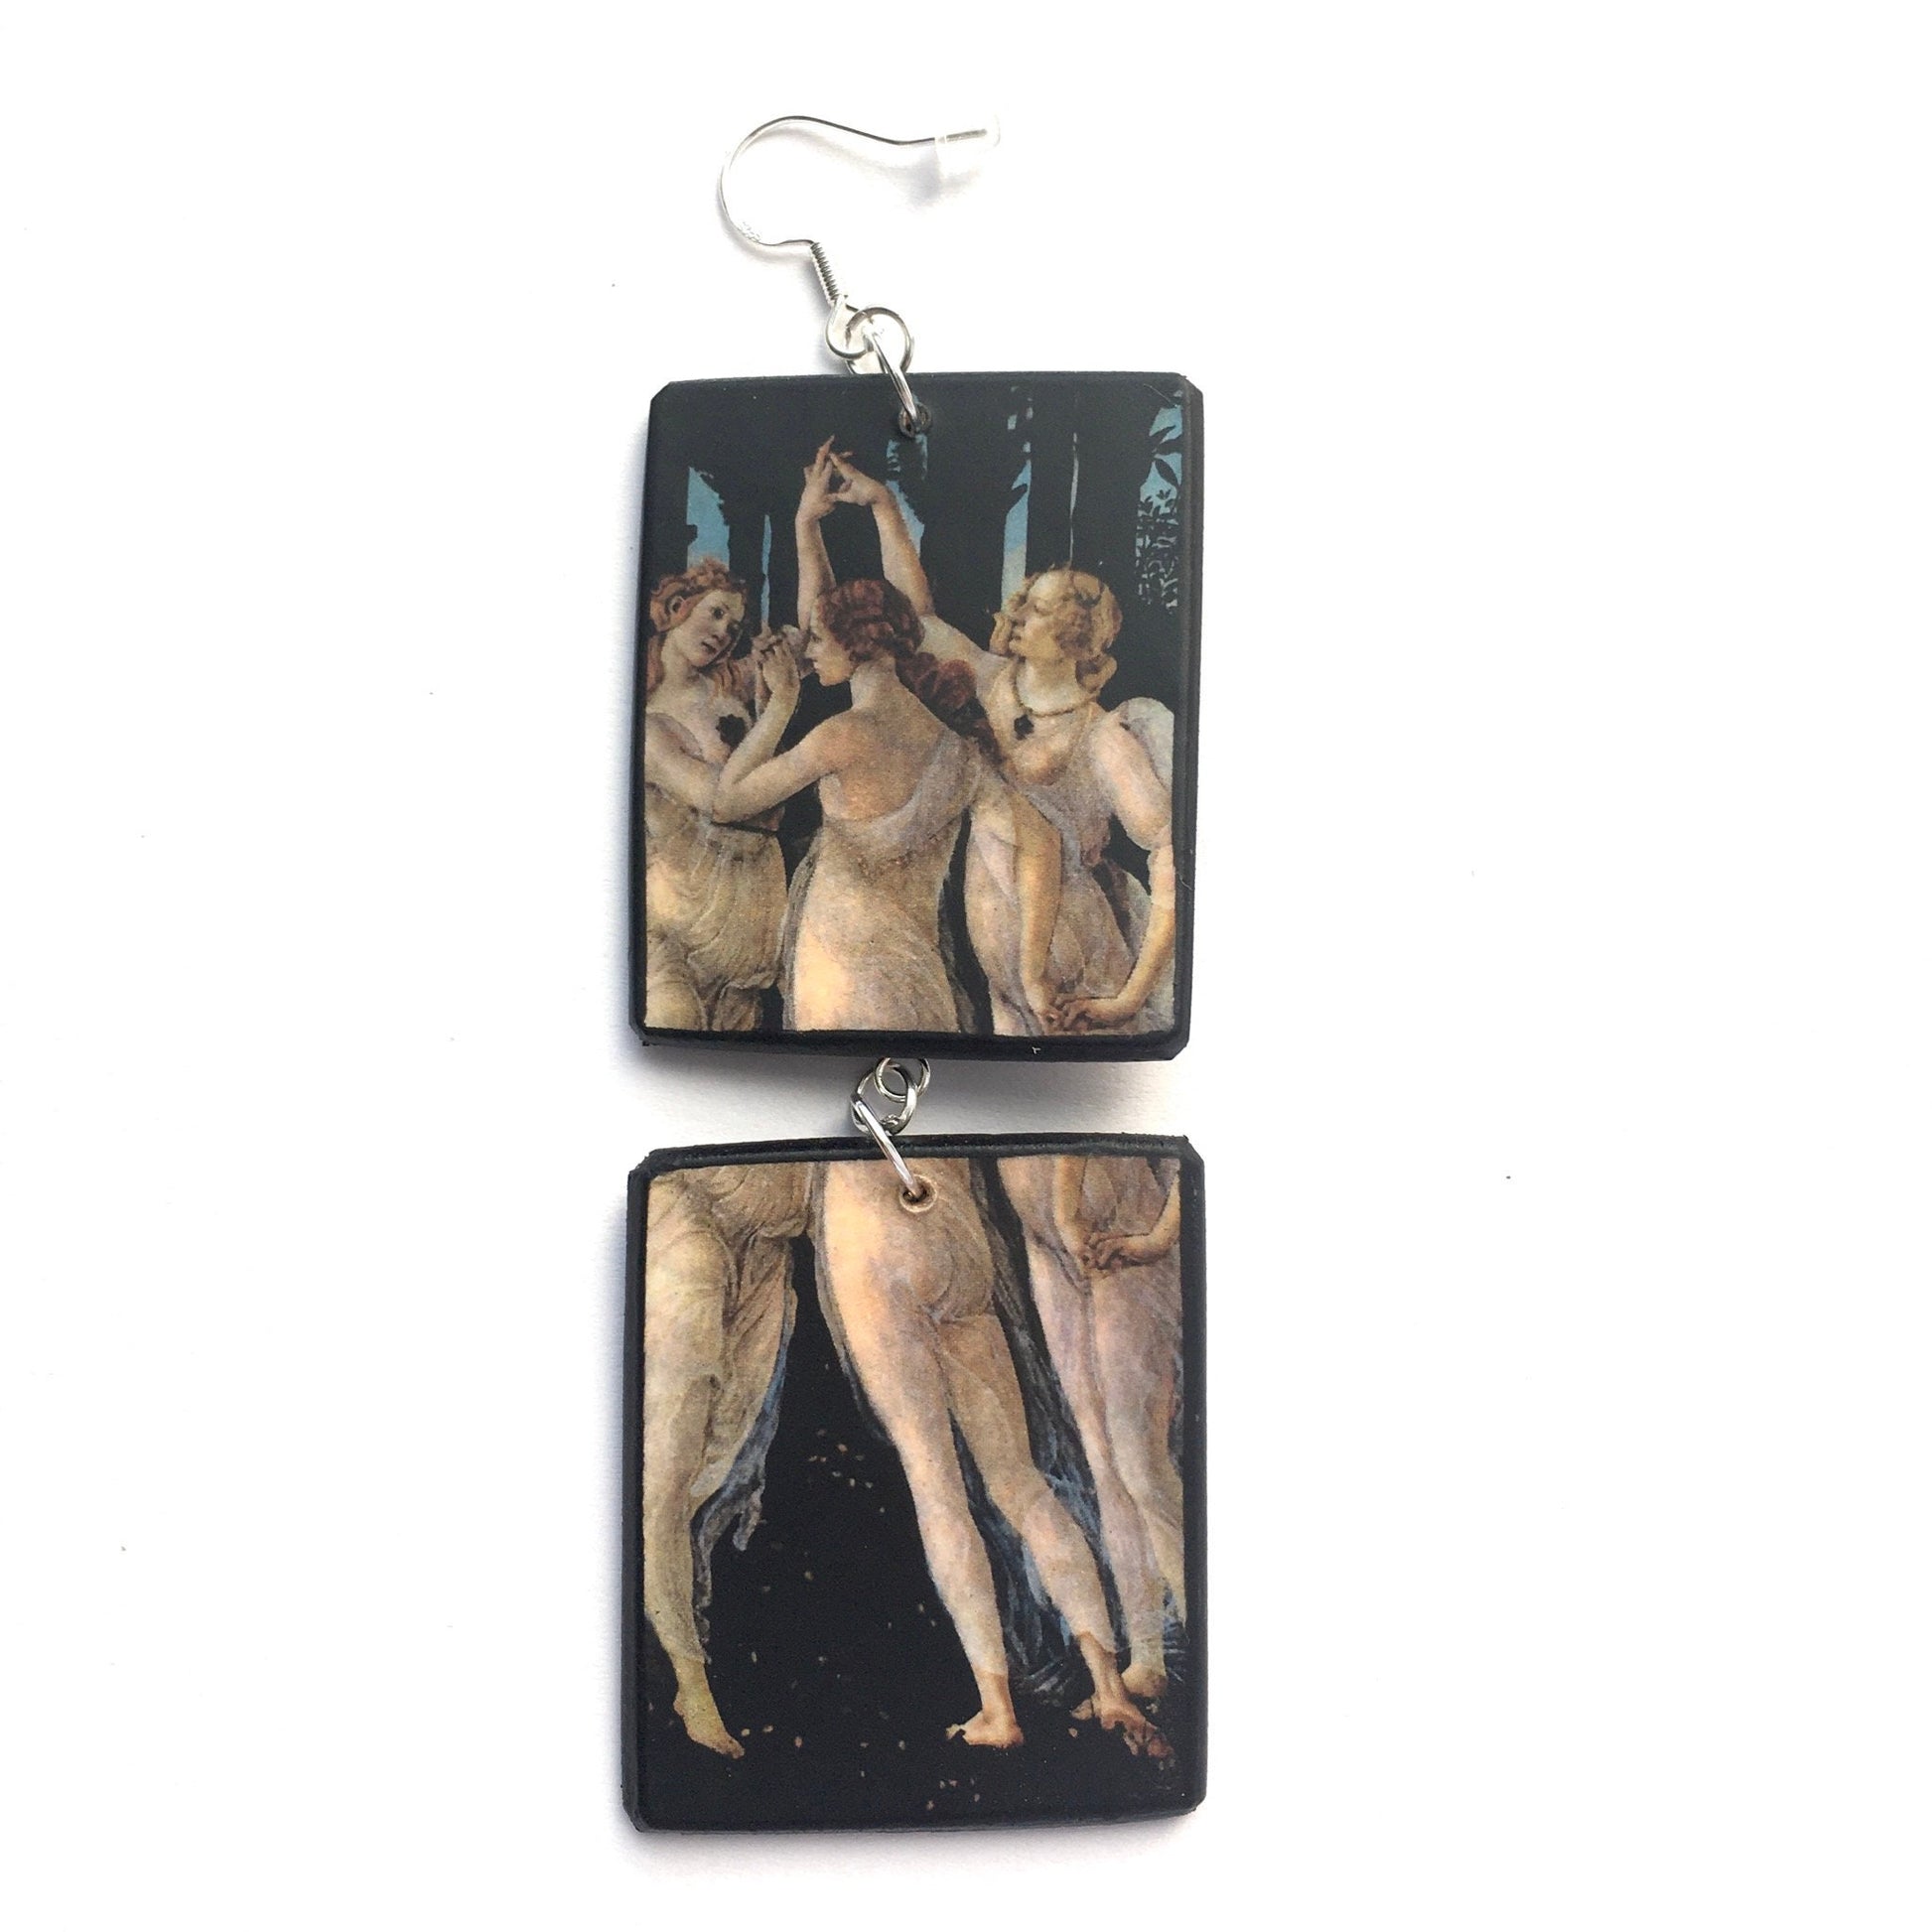 "The Three Graces" famous  Italian Renaissance art painting by Sandro Botticelli is the detail for these aesthetic, mismatched, sustainable wooden art earrings. The earrings arel lightweight and finished with sterling silver 925 hooks